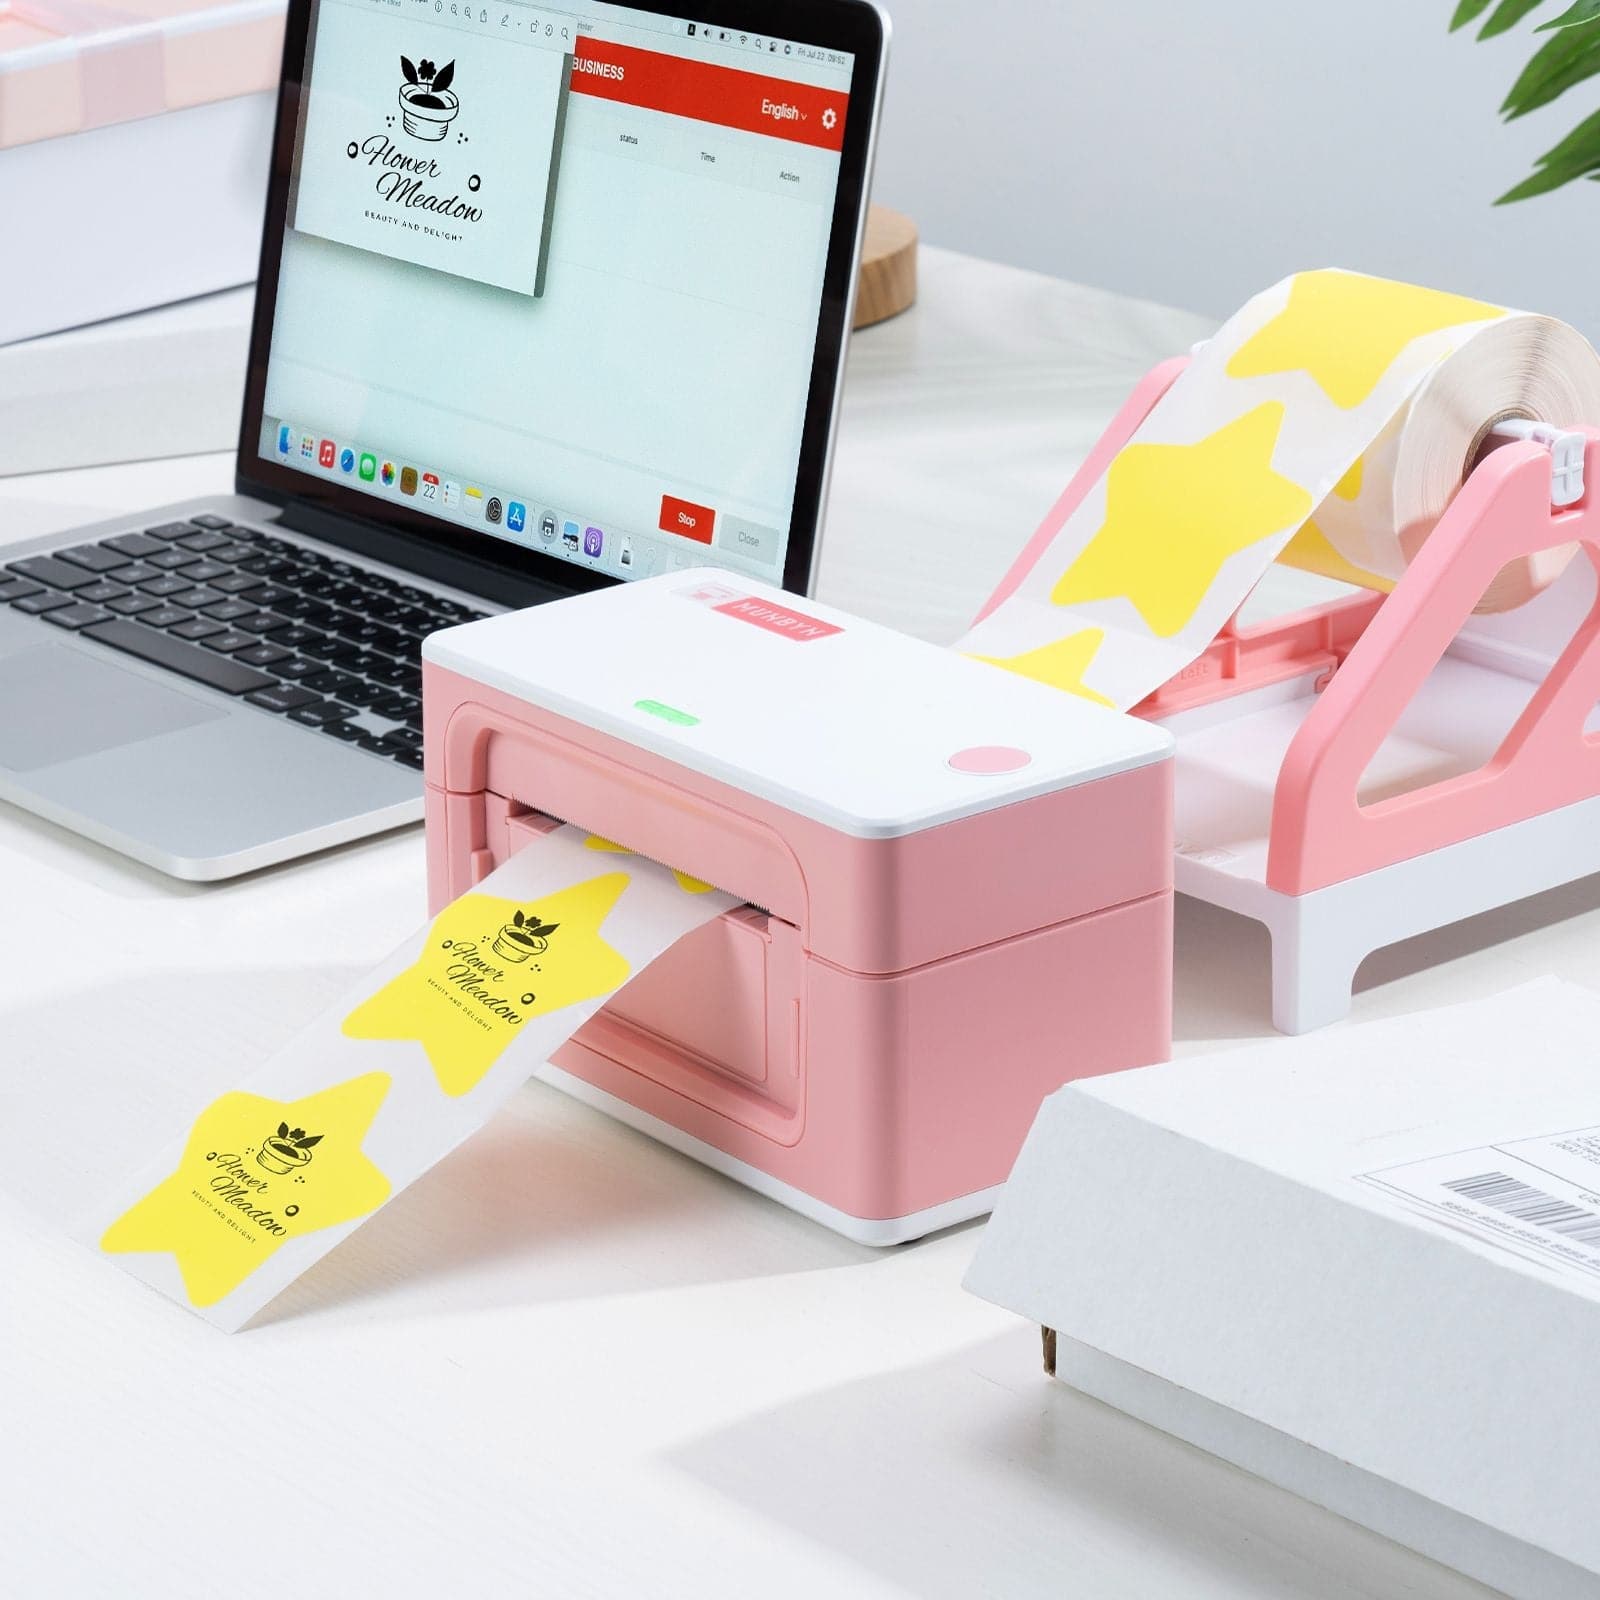 Create star stickers using a MUNBYN P941 pink thermal label printer at home office.